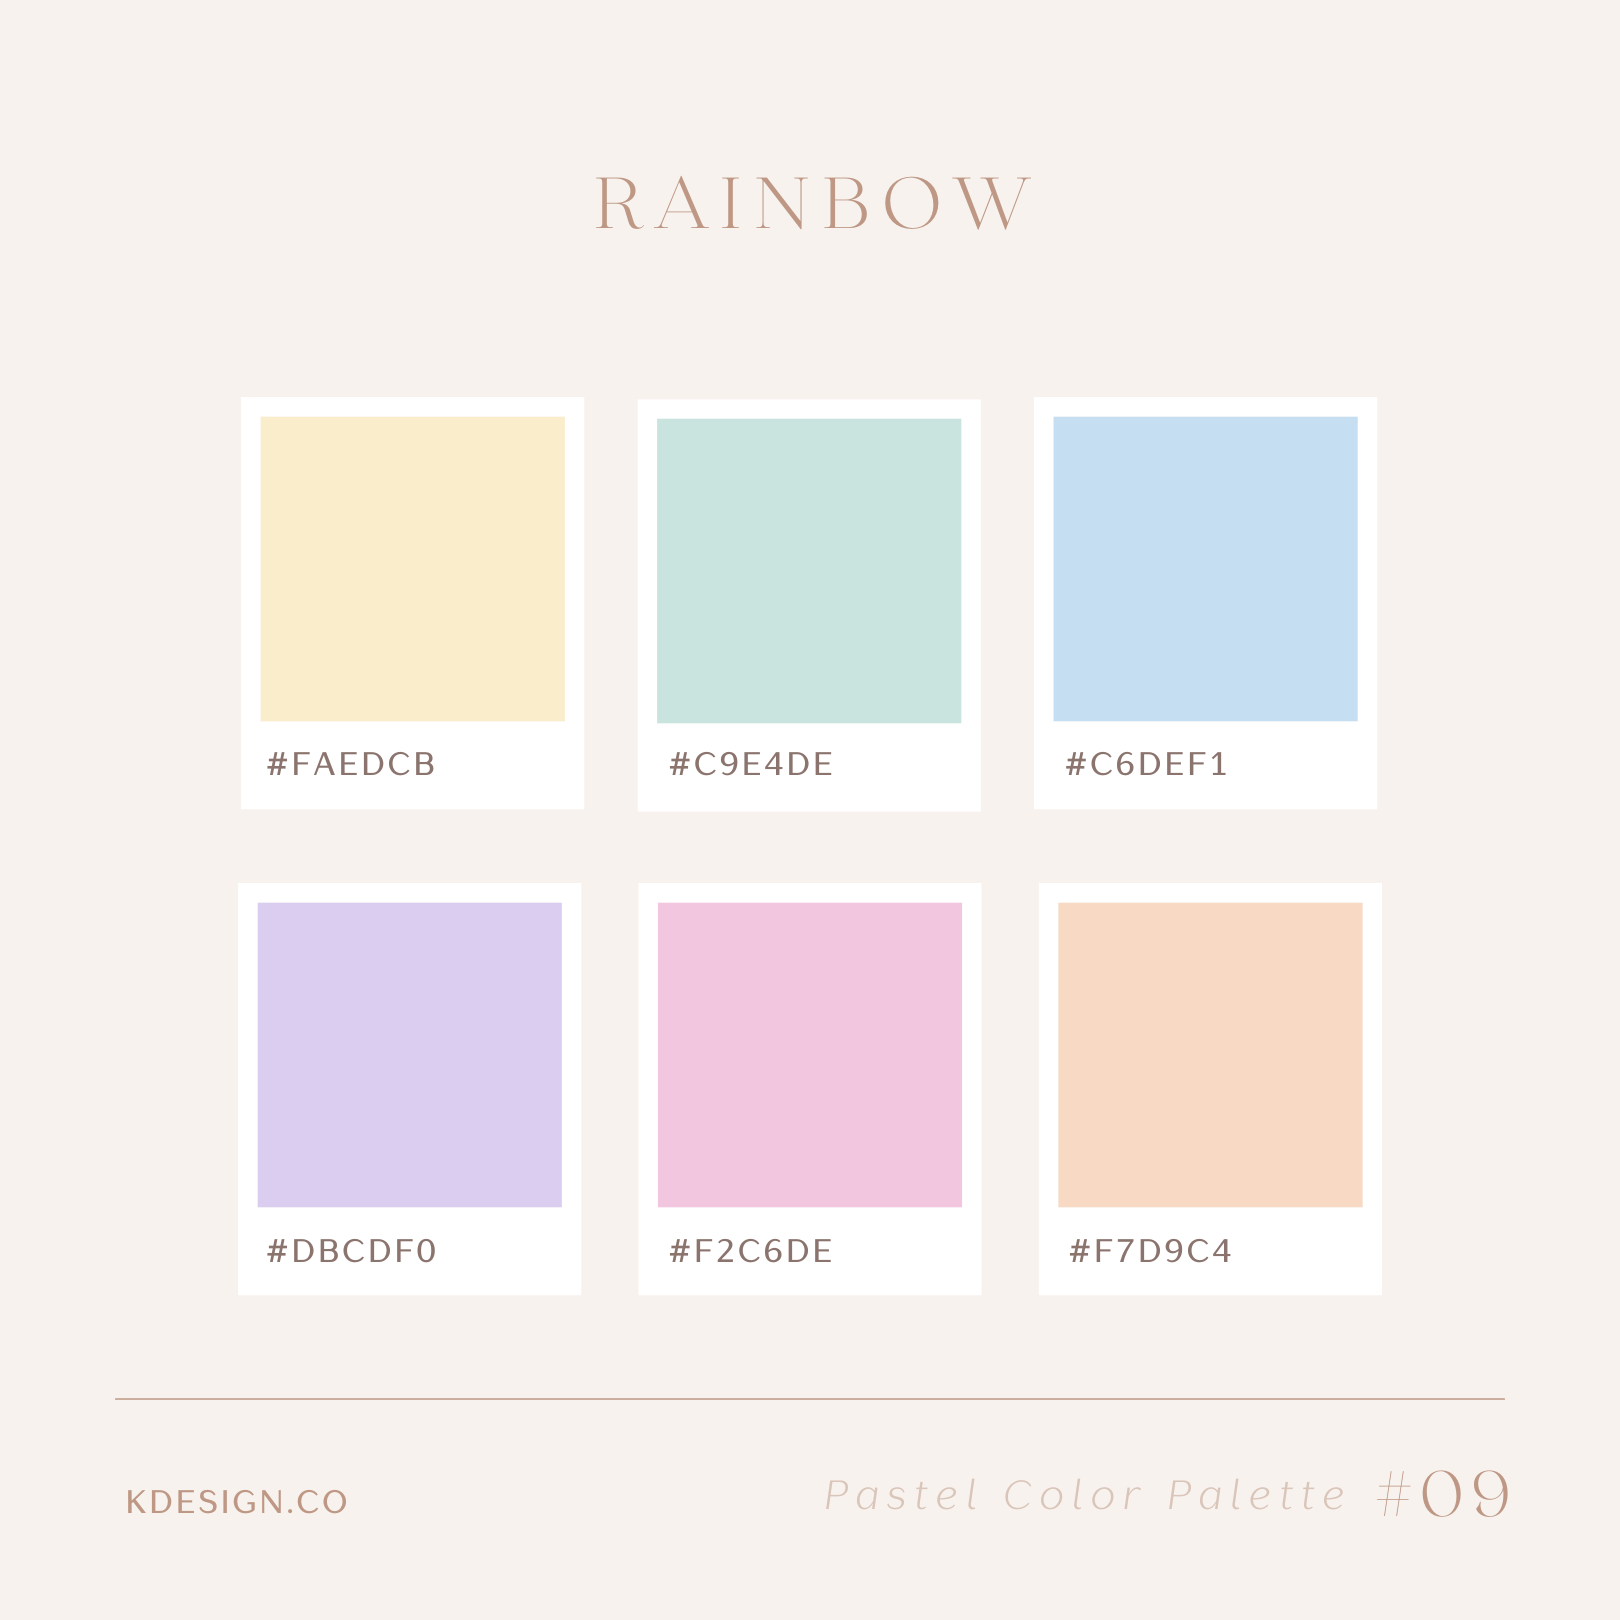 Pastel Colors in Design: How to Use Them Right (Examples with